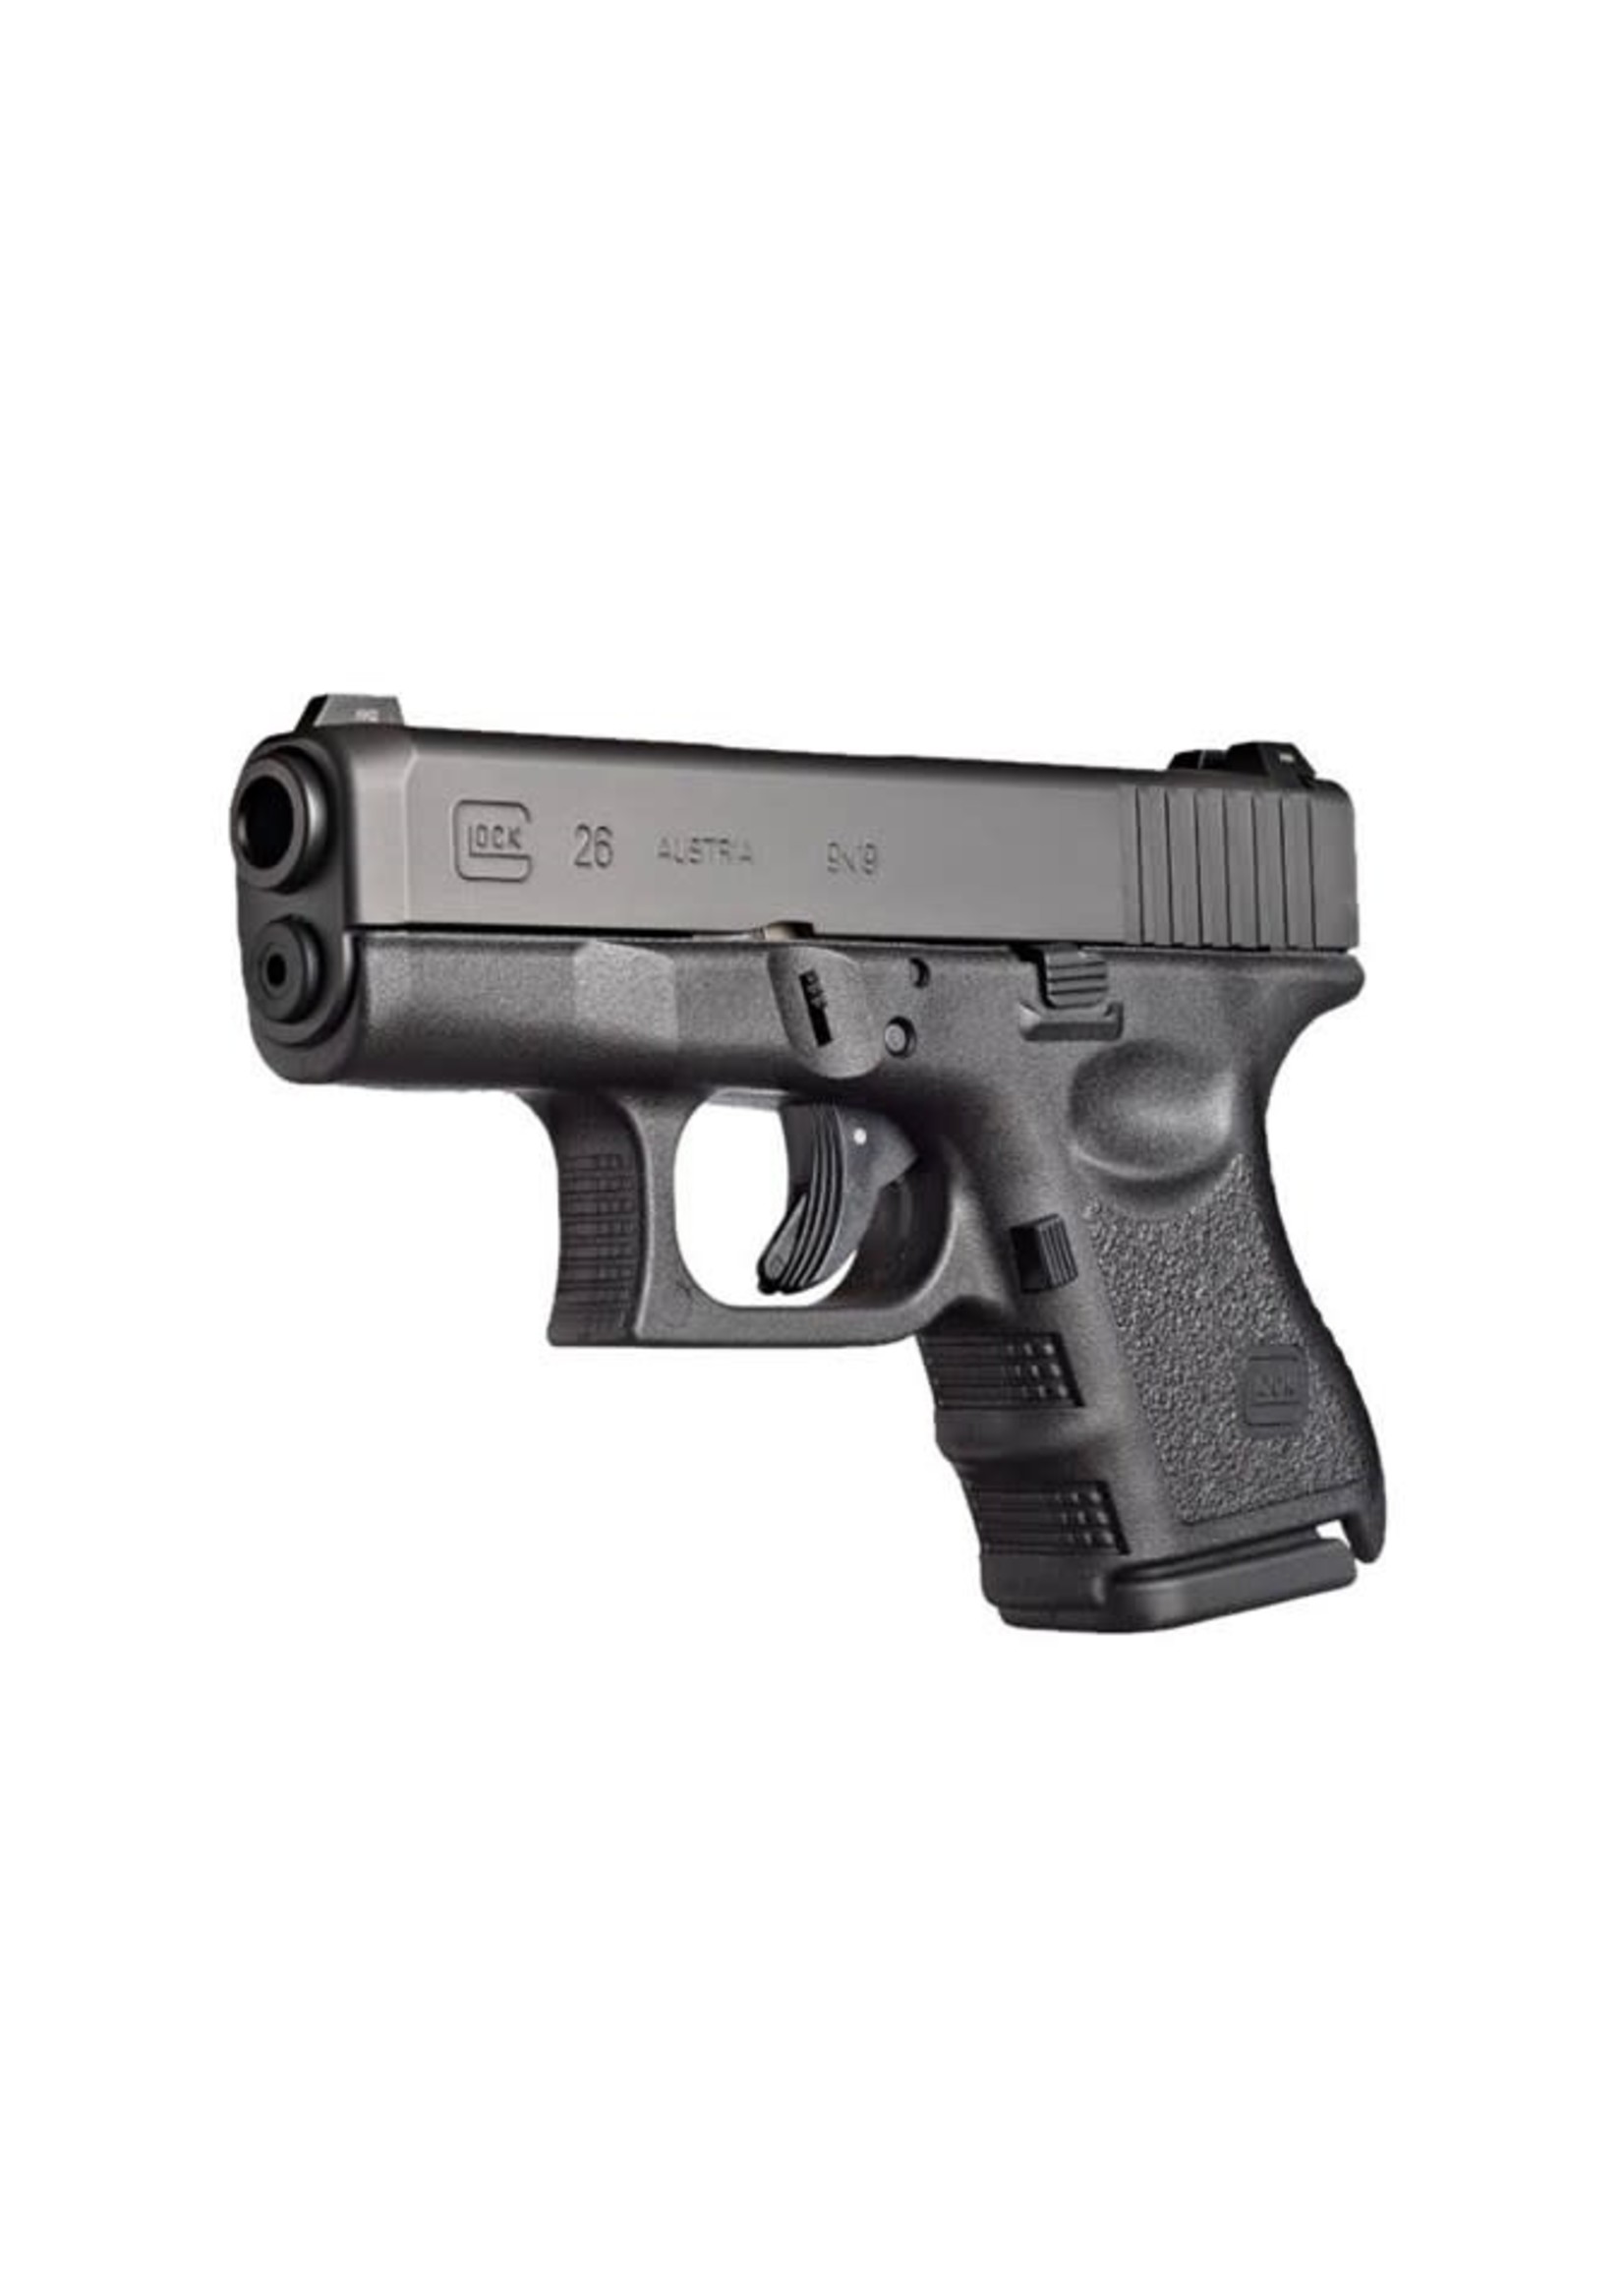 Glock *REDUCED PRICE!* Glock 26 G3, 9mm, 10+1, 3.5", Fixed sights, (2) 10rd Magazines, 9mm